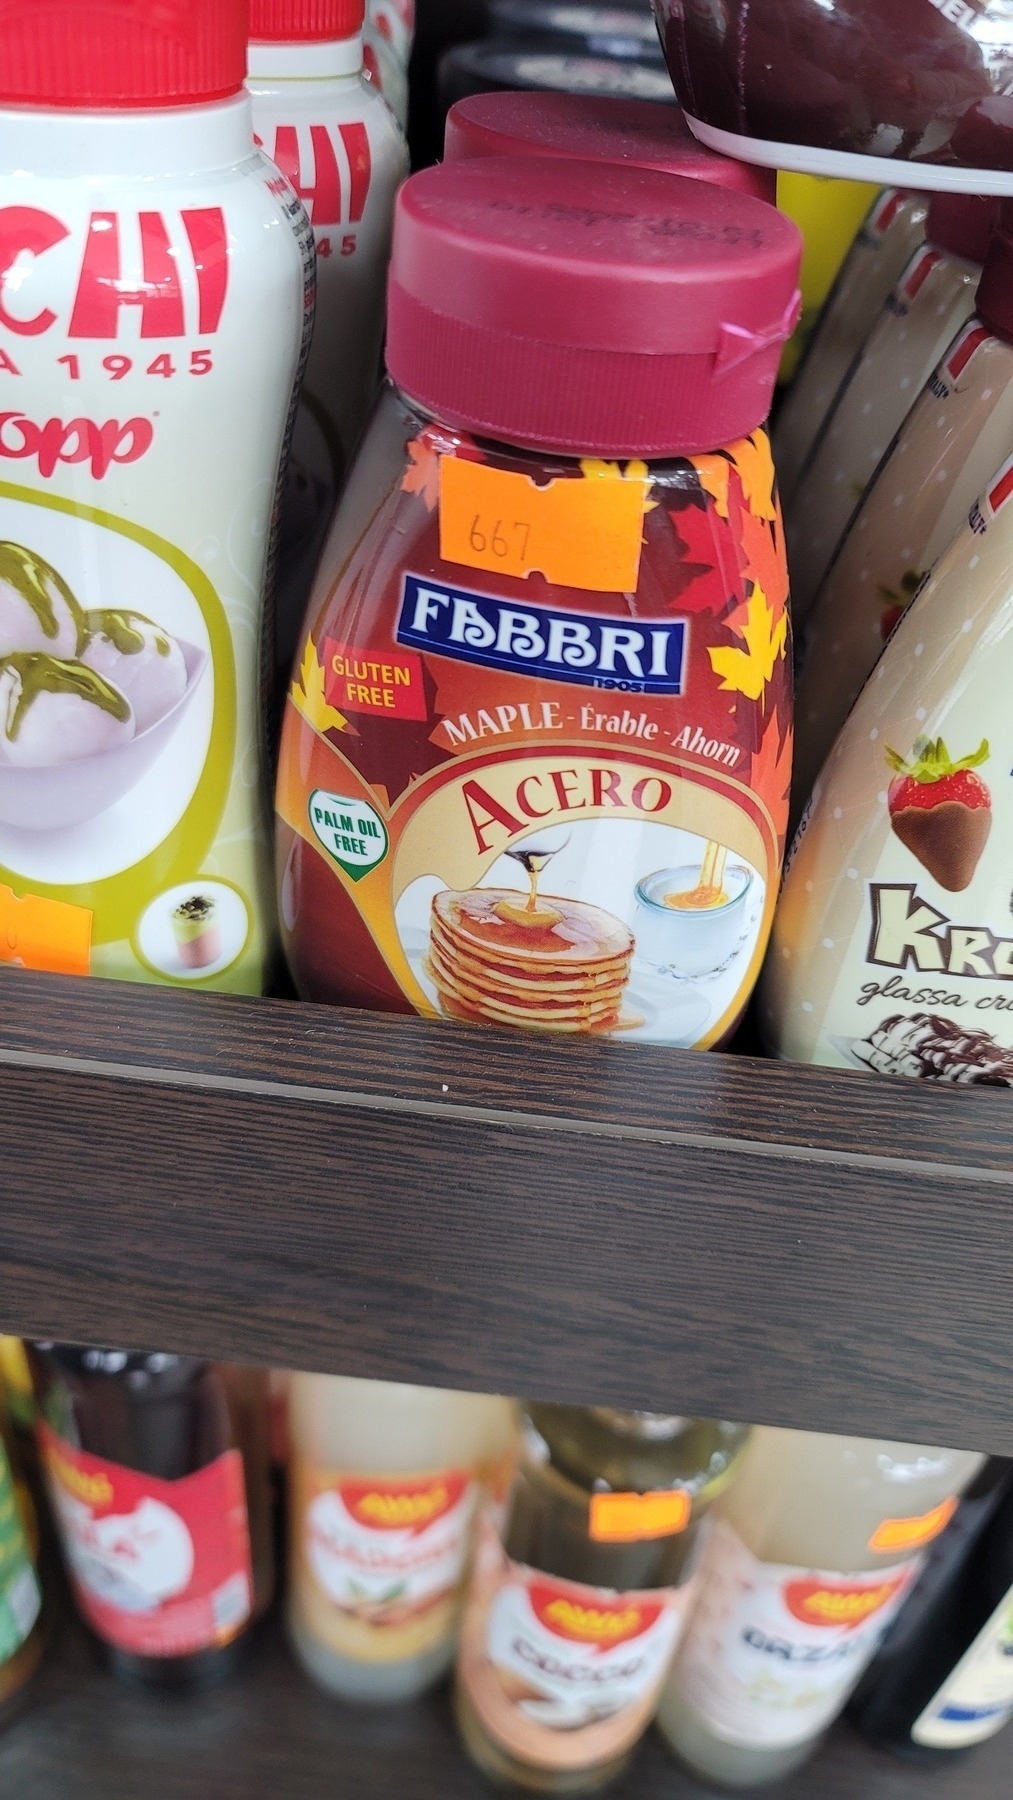 Fabbri brand maple syrup bottle on a store shelf, with a 667 som price sticker on it